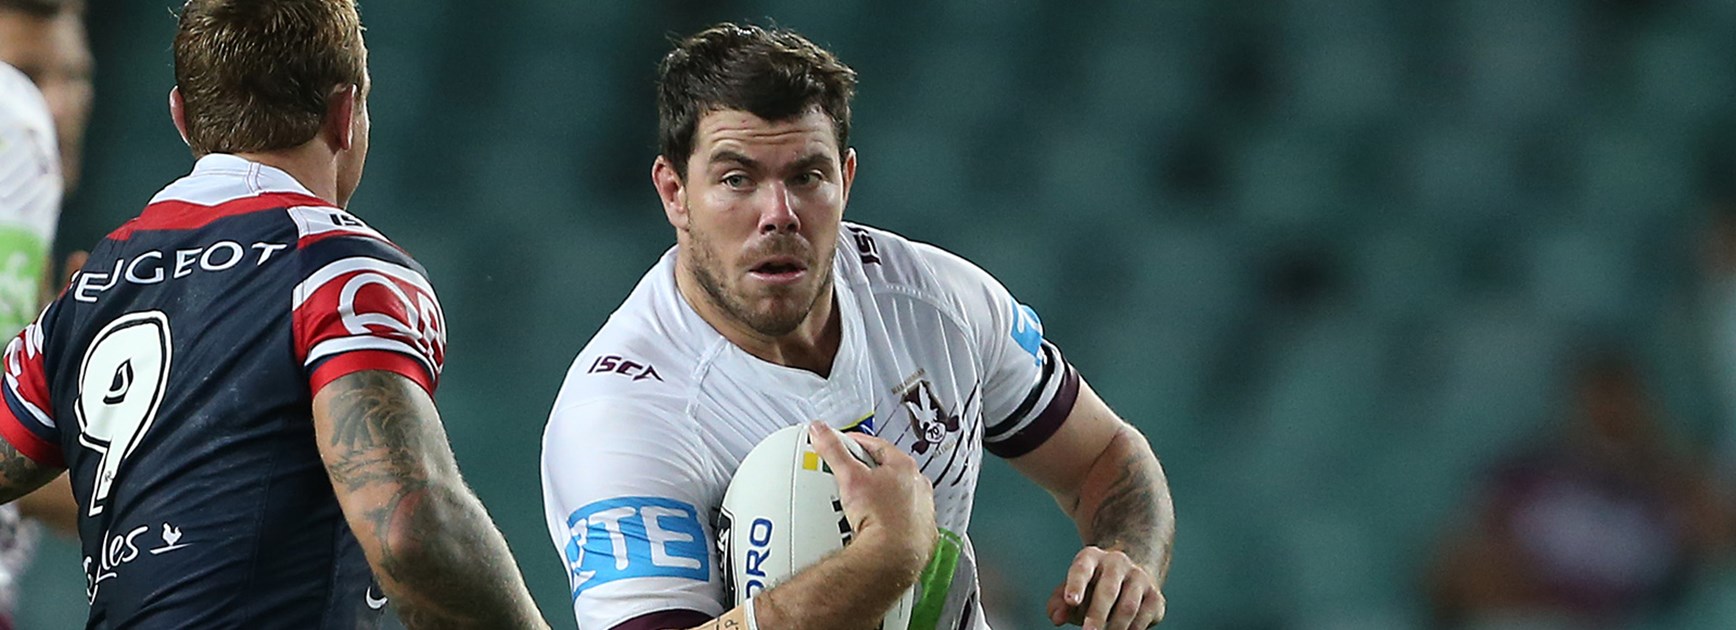 Sea Eagles forward Josh Starling in action against the Roosters in the 2016 Telstra Premiership.